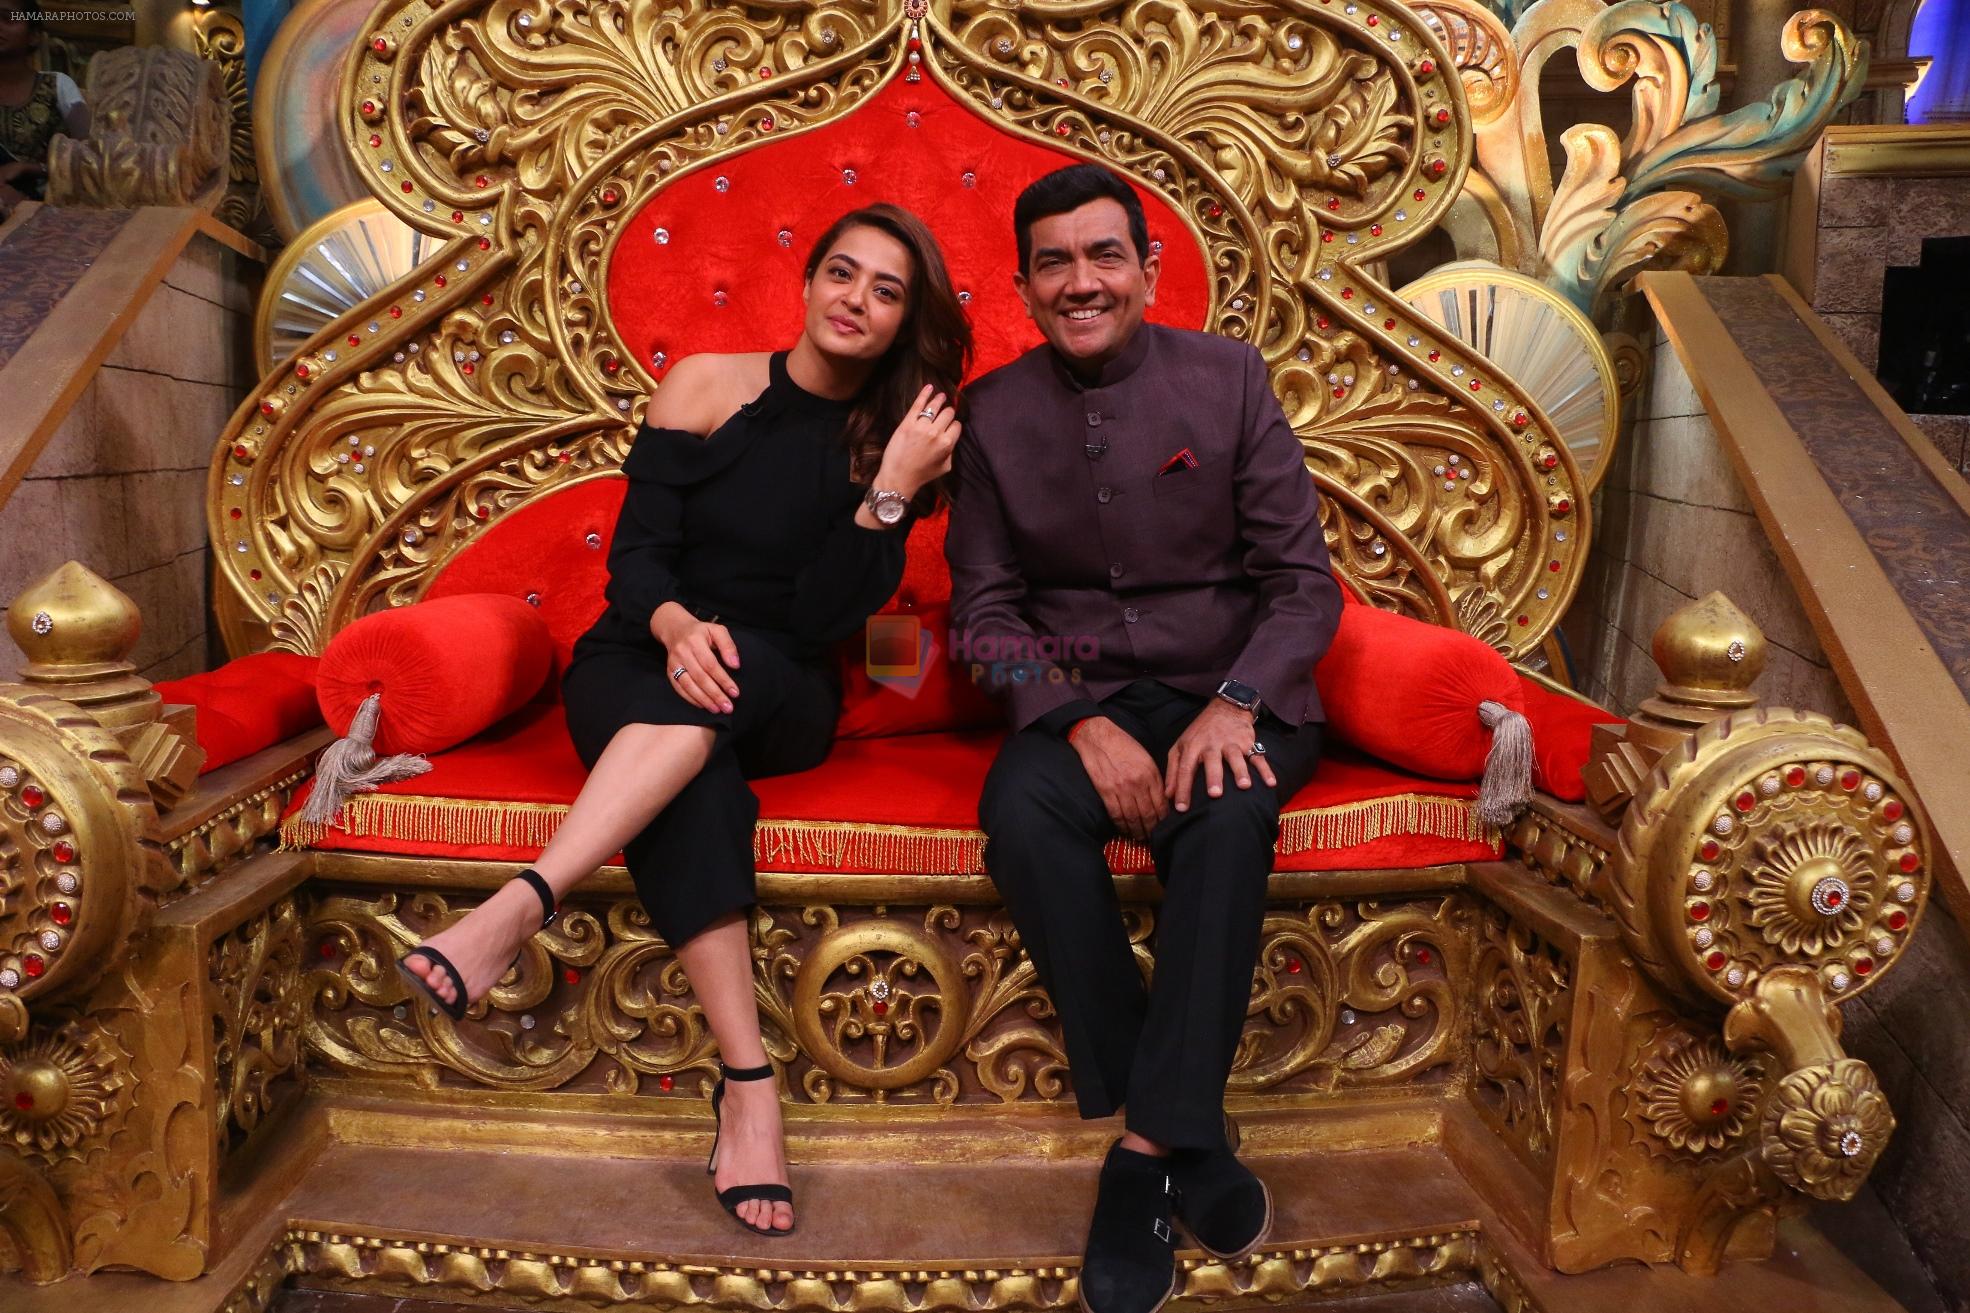 Sanjeev Kapoor, Surveen Chawla and Mudassar Khan grace the stage of COmedy Nights Bachao Taaza